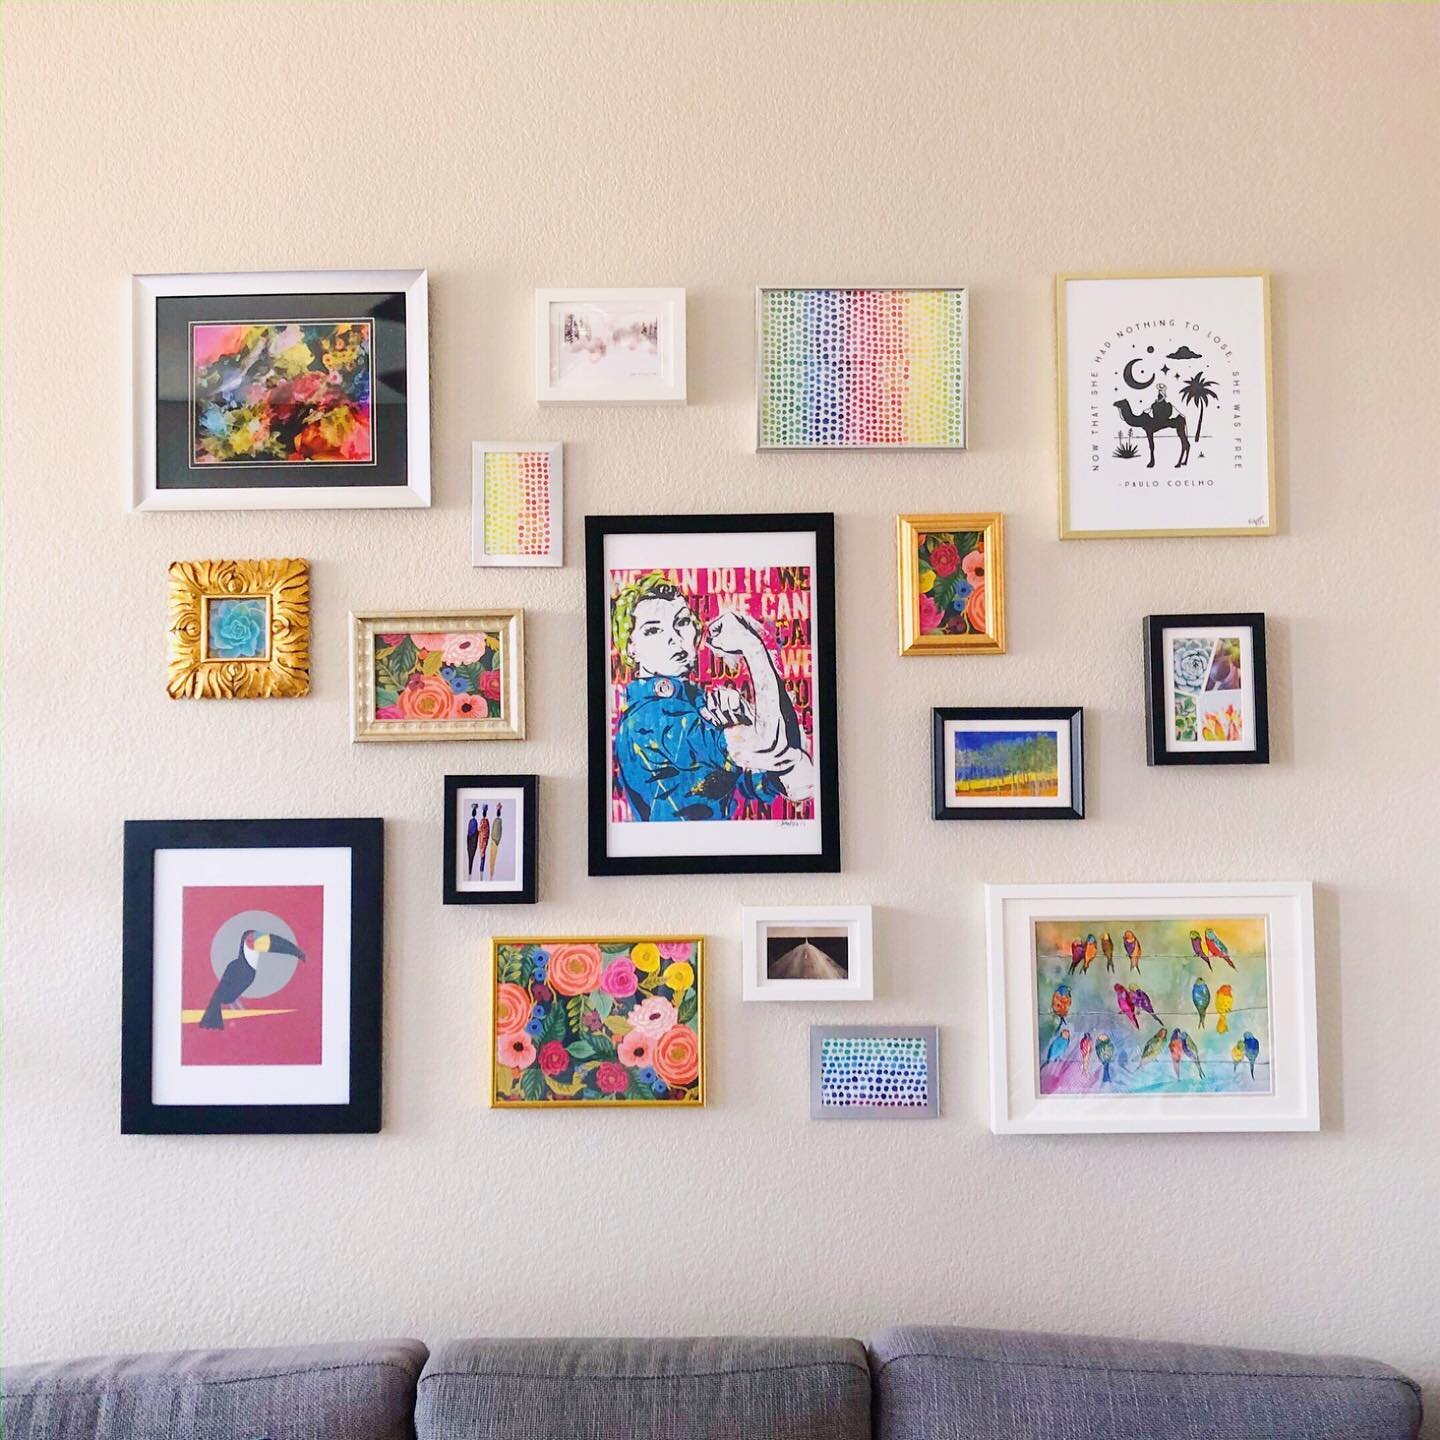 #tbt to helping my client create this (budget-friendly) girl power gallery wall. She says it immediately made her house feel like a home, and seeing it everyday makes her smile!
⁣
ART:
- Art from local shops and galleries:
&nbsp;&nbsp;&nbsp;&nbsp;@gr